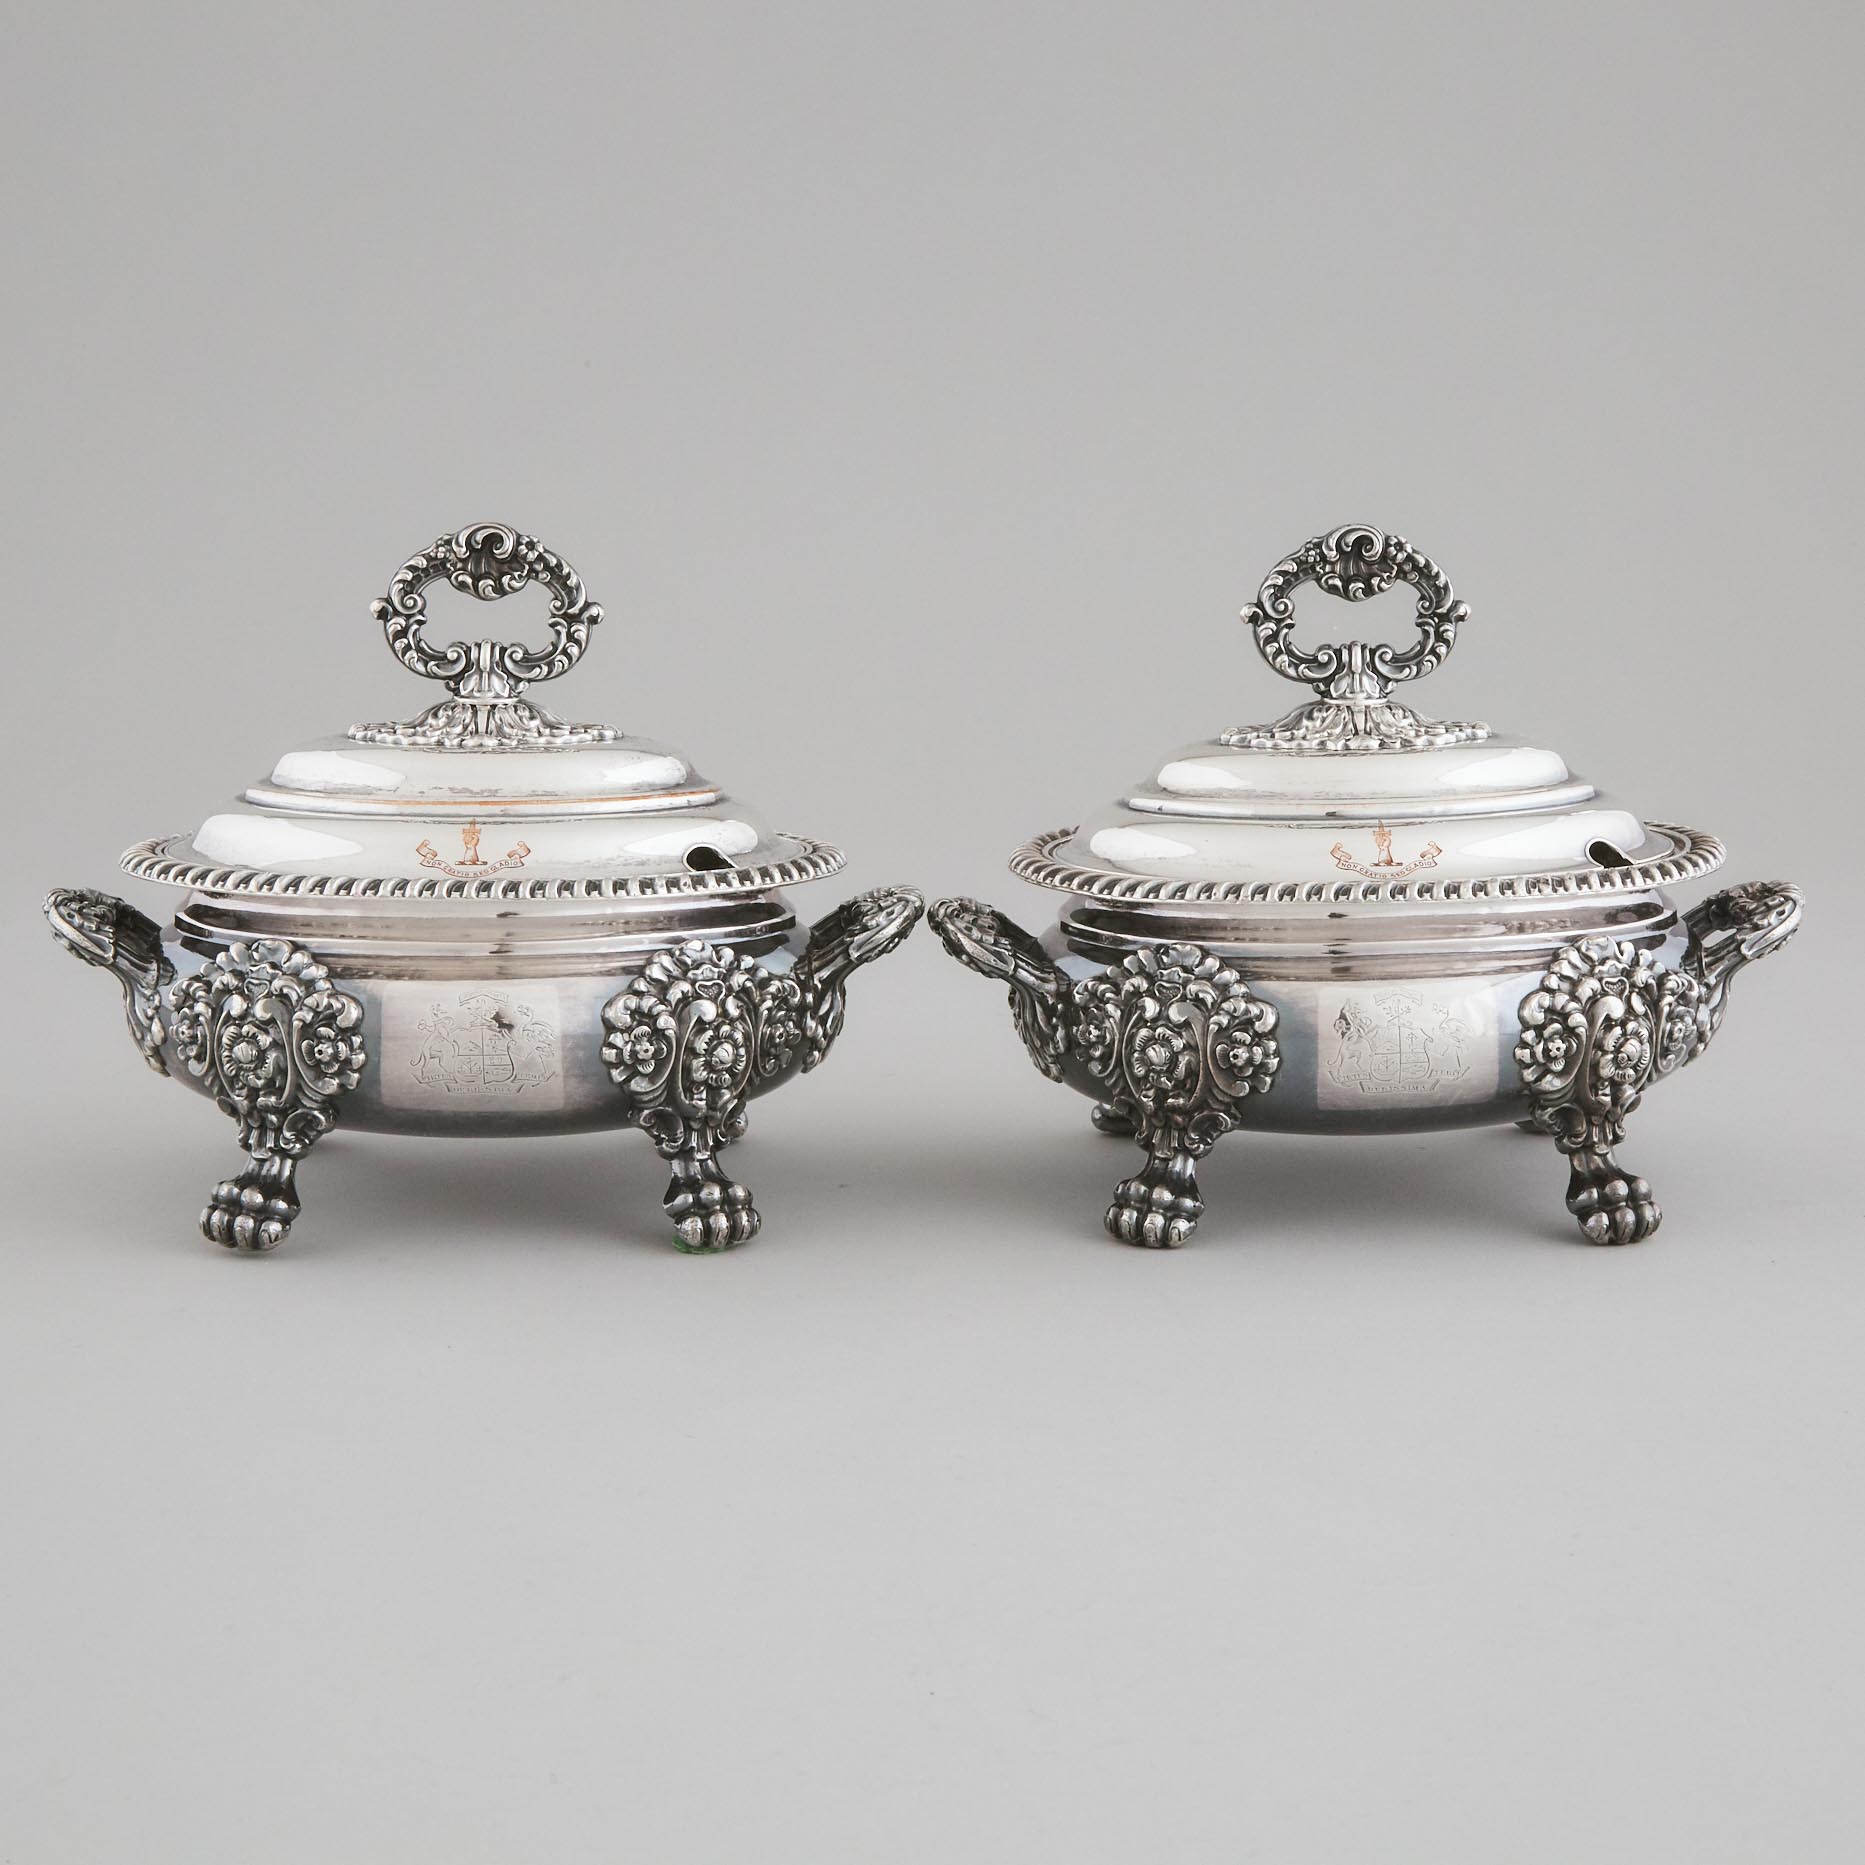 Pair of Old Sheffield Plate Oval Bellied Sauce Tureens and Covers, c.1825